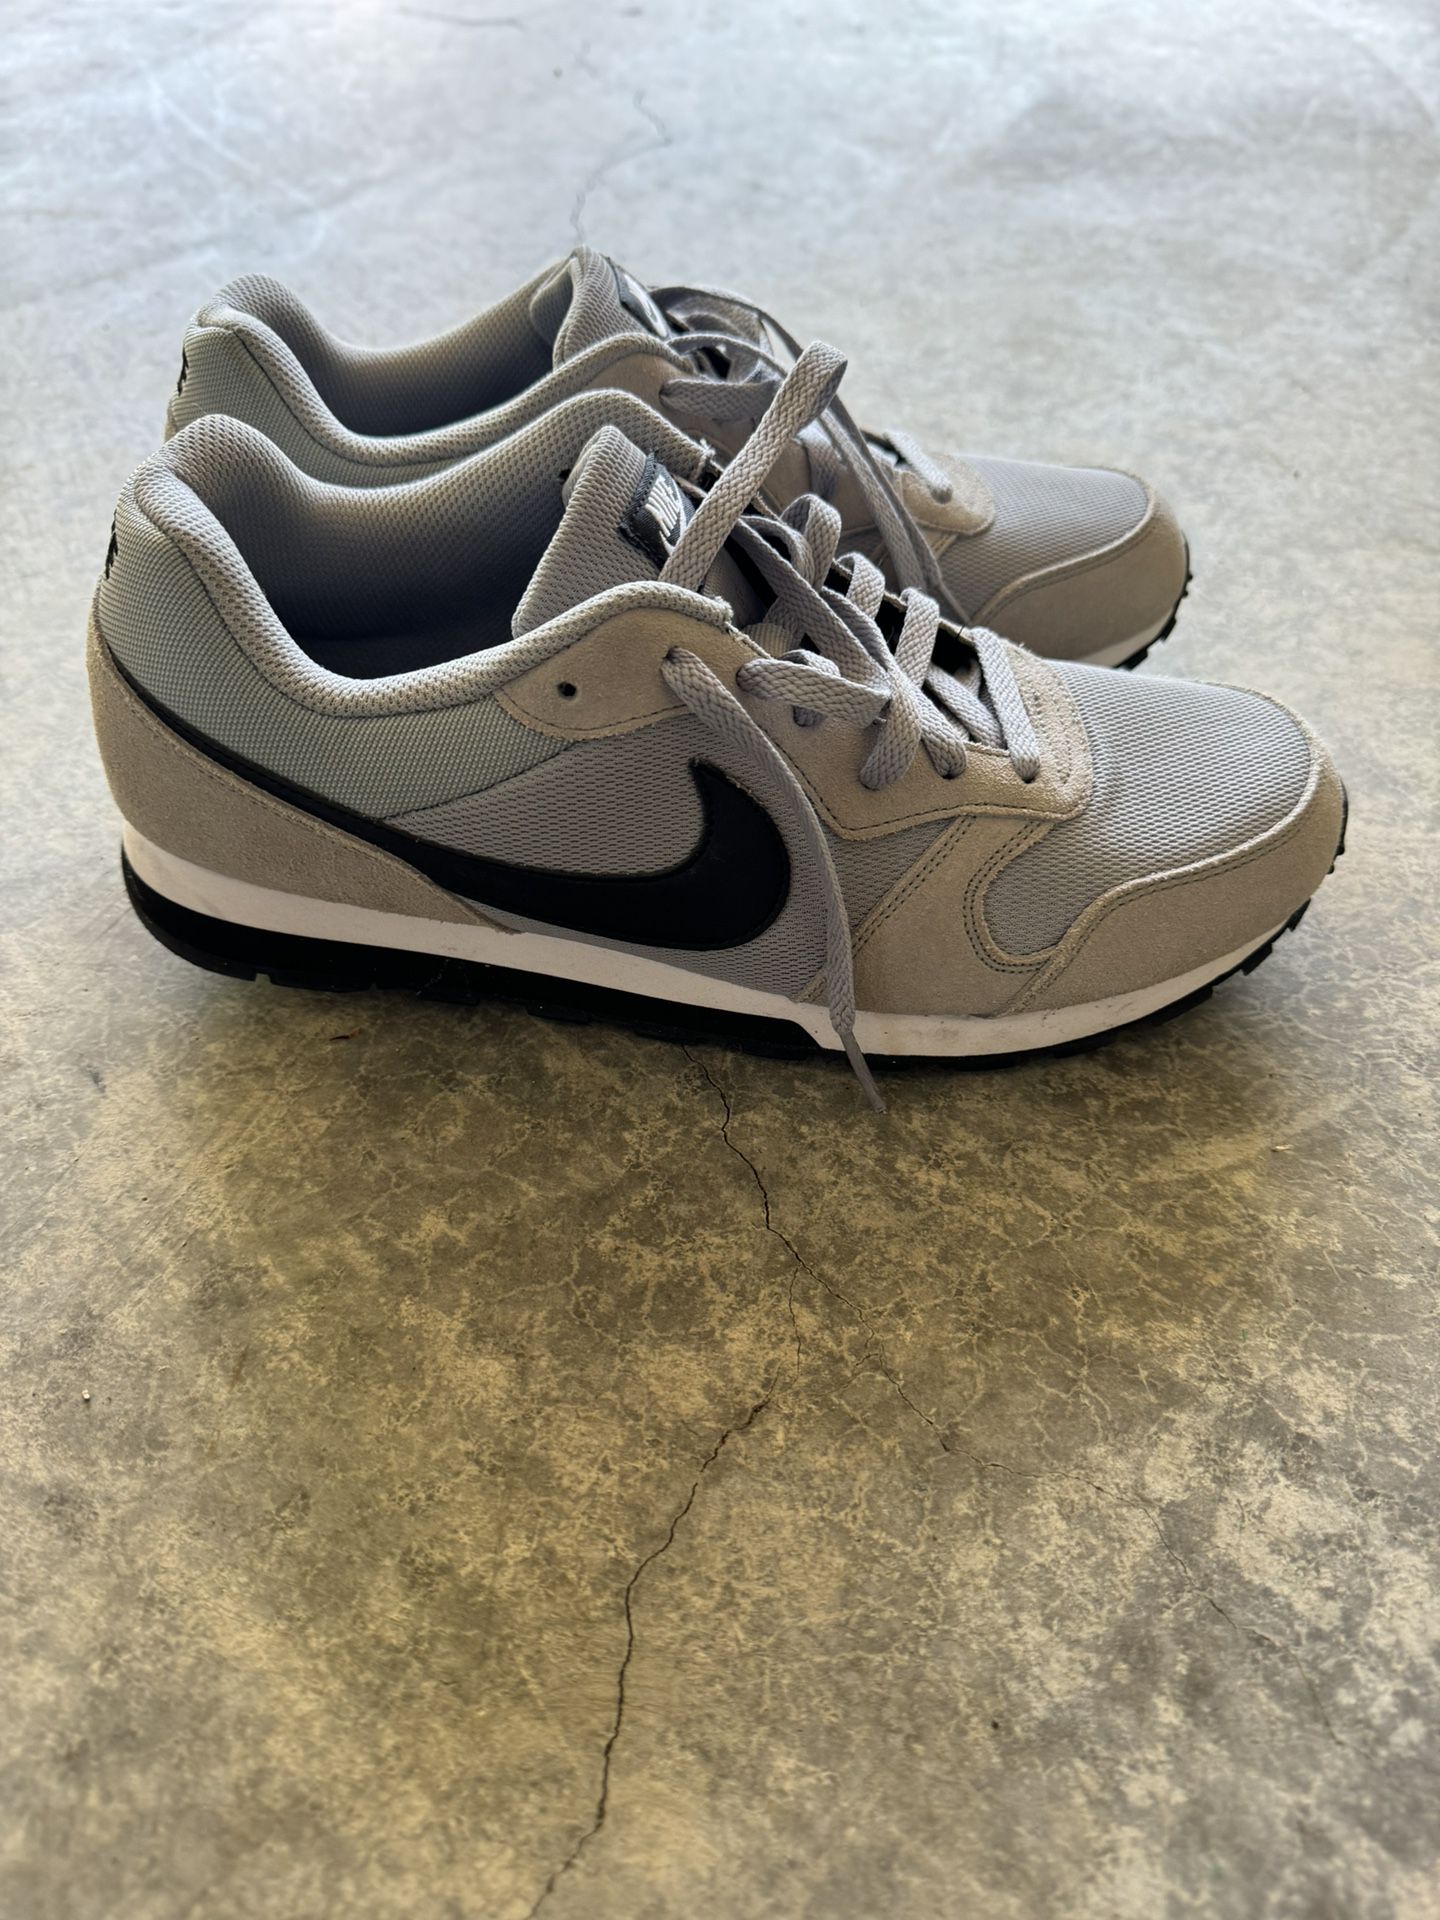 Brand New Nike MD Runner 2 Shoes Size 10.5